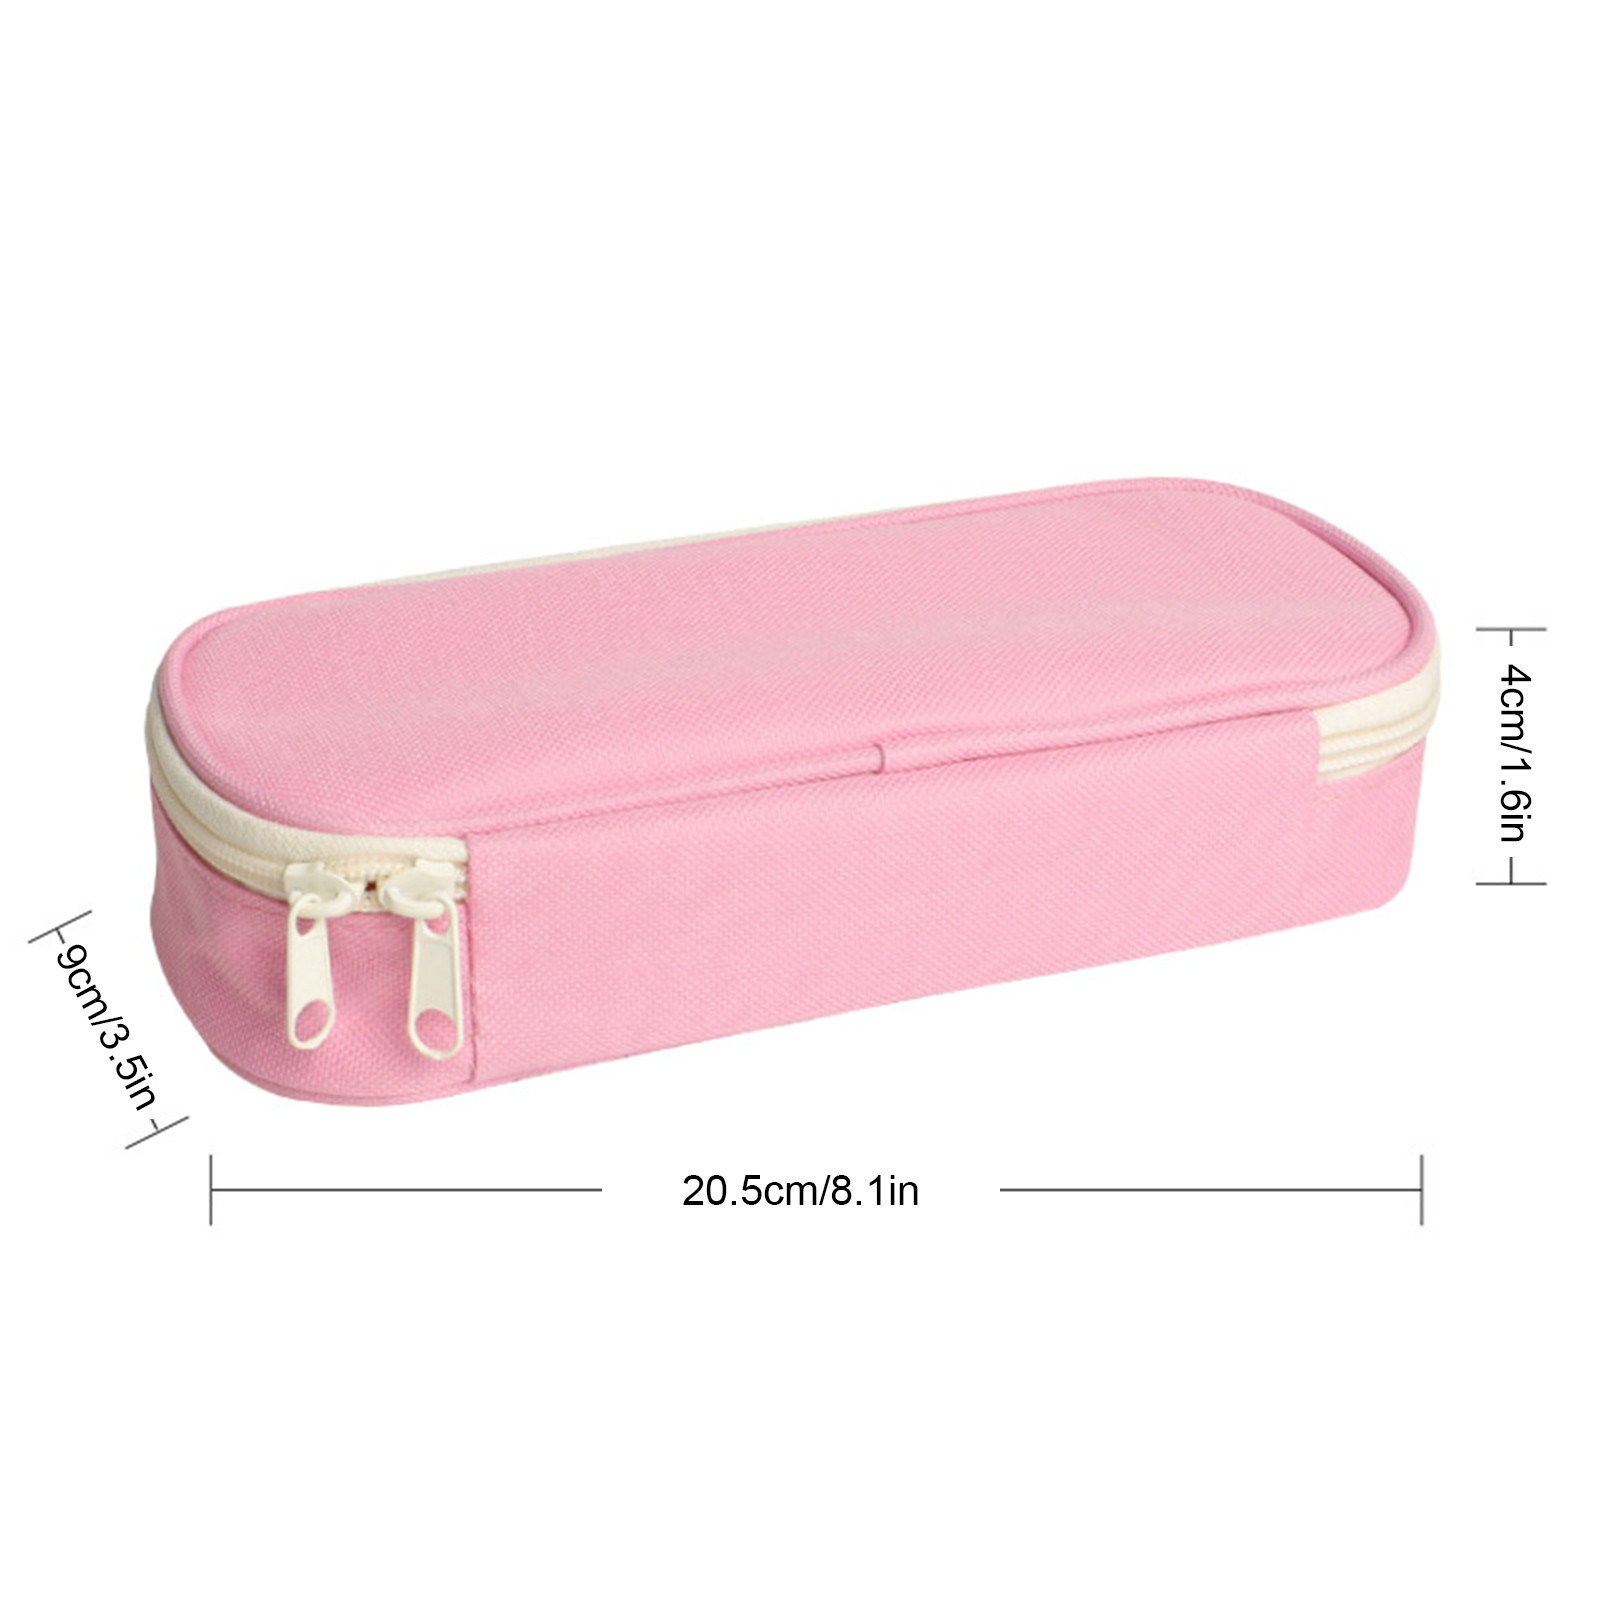 Oalirro Canvas Pencil Case, Colored Cute Pencil Bags Lovely Stationery Pen Pouch with Zipper for Girls, Kids, School Student Stationery Office